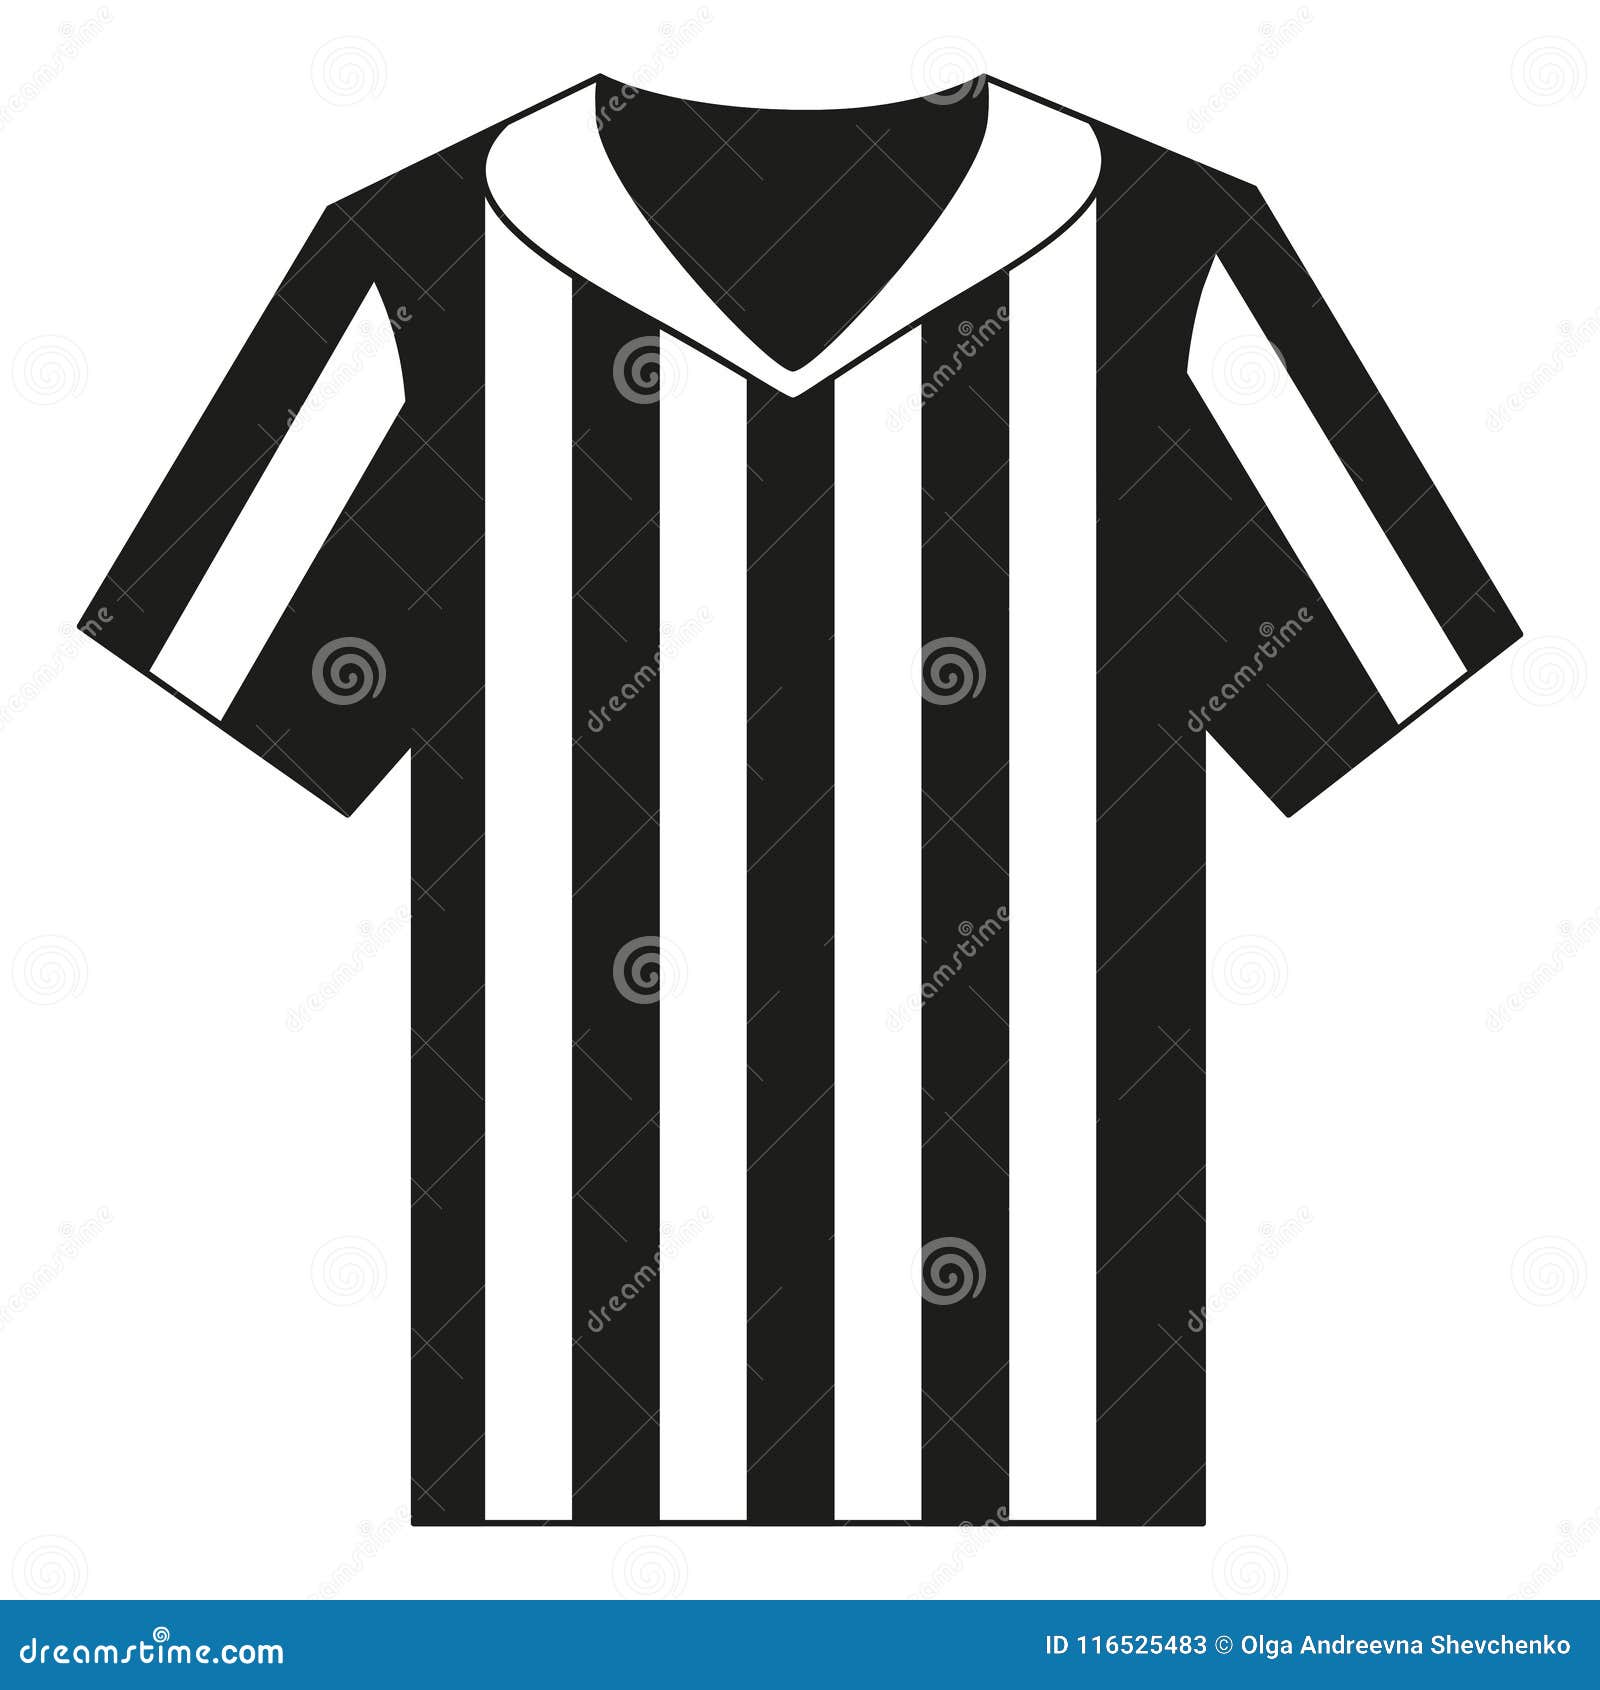 Flat Black and White Referee Shirt. Stock Vector - Illustration of ...